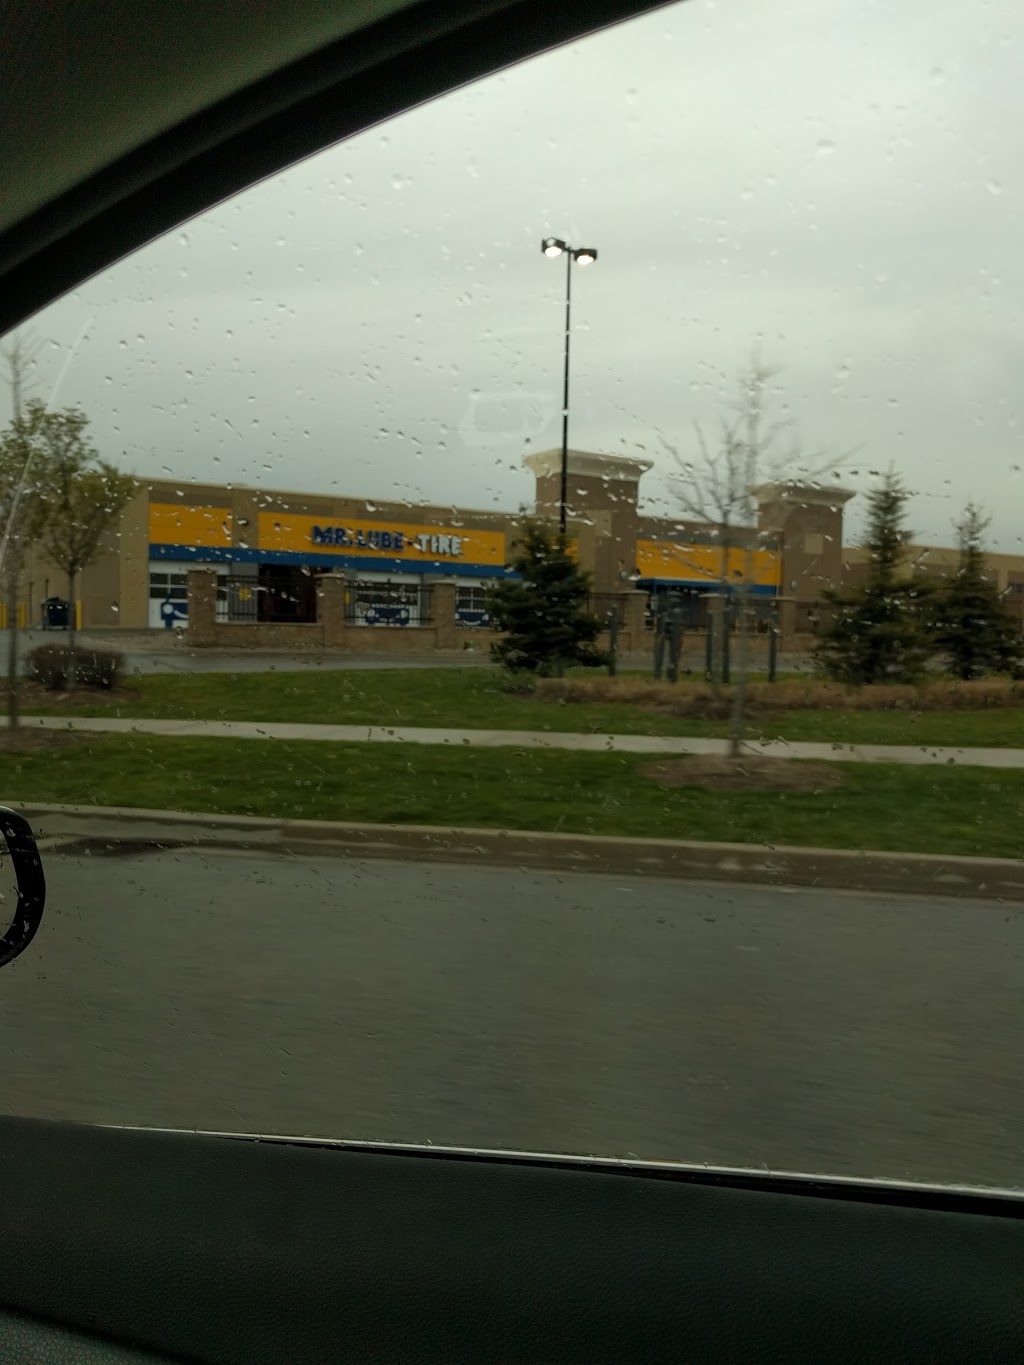 Mr. Lube in Walmart | 135 First Commerce Dr, Aurora, ON L4G 0G2, Canada | Phone: (905) 841-9888